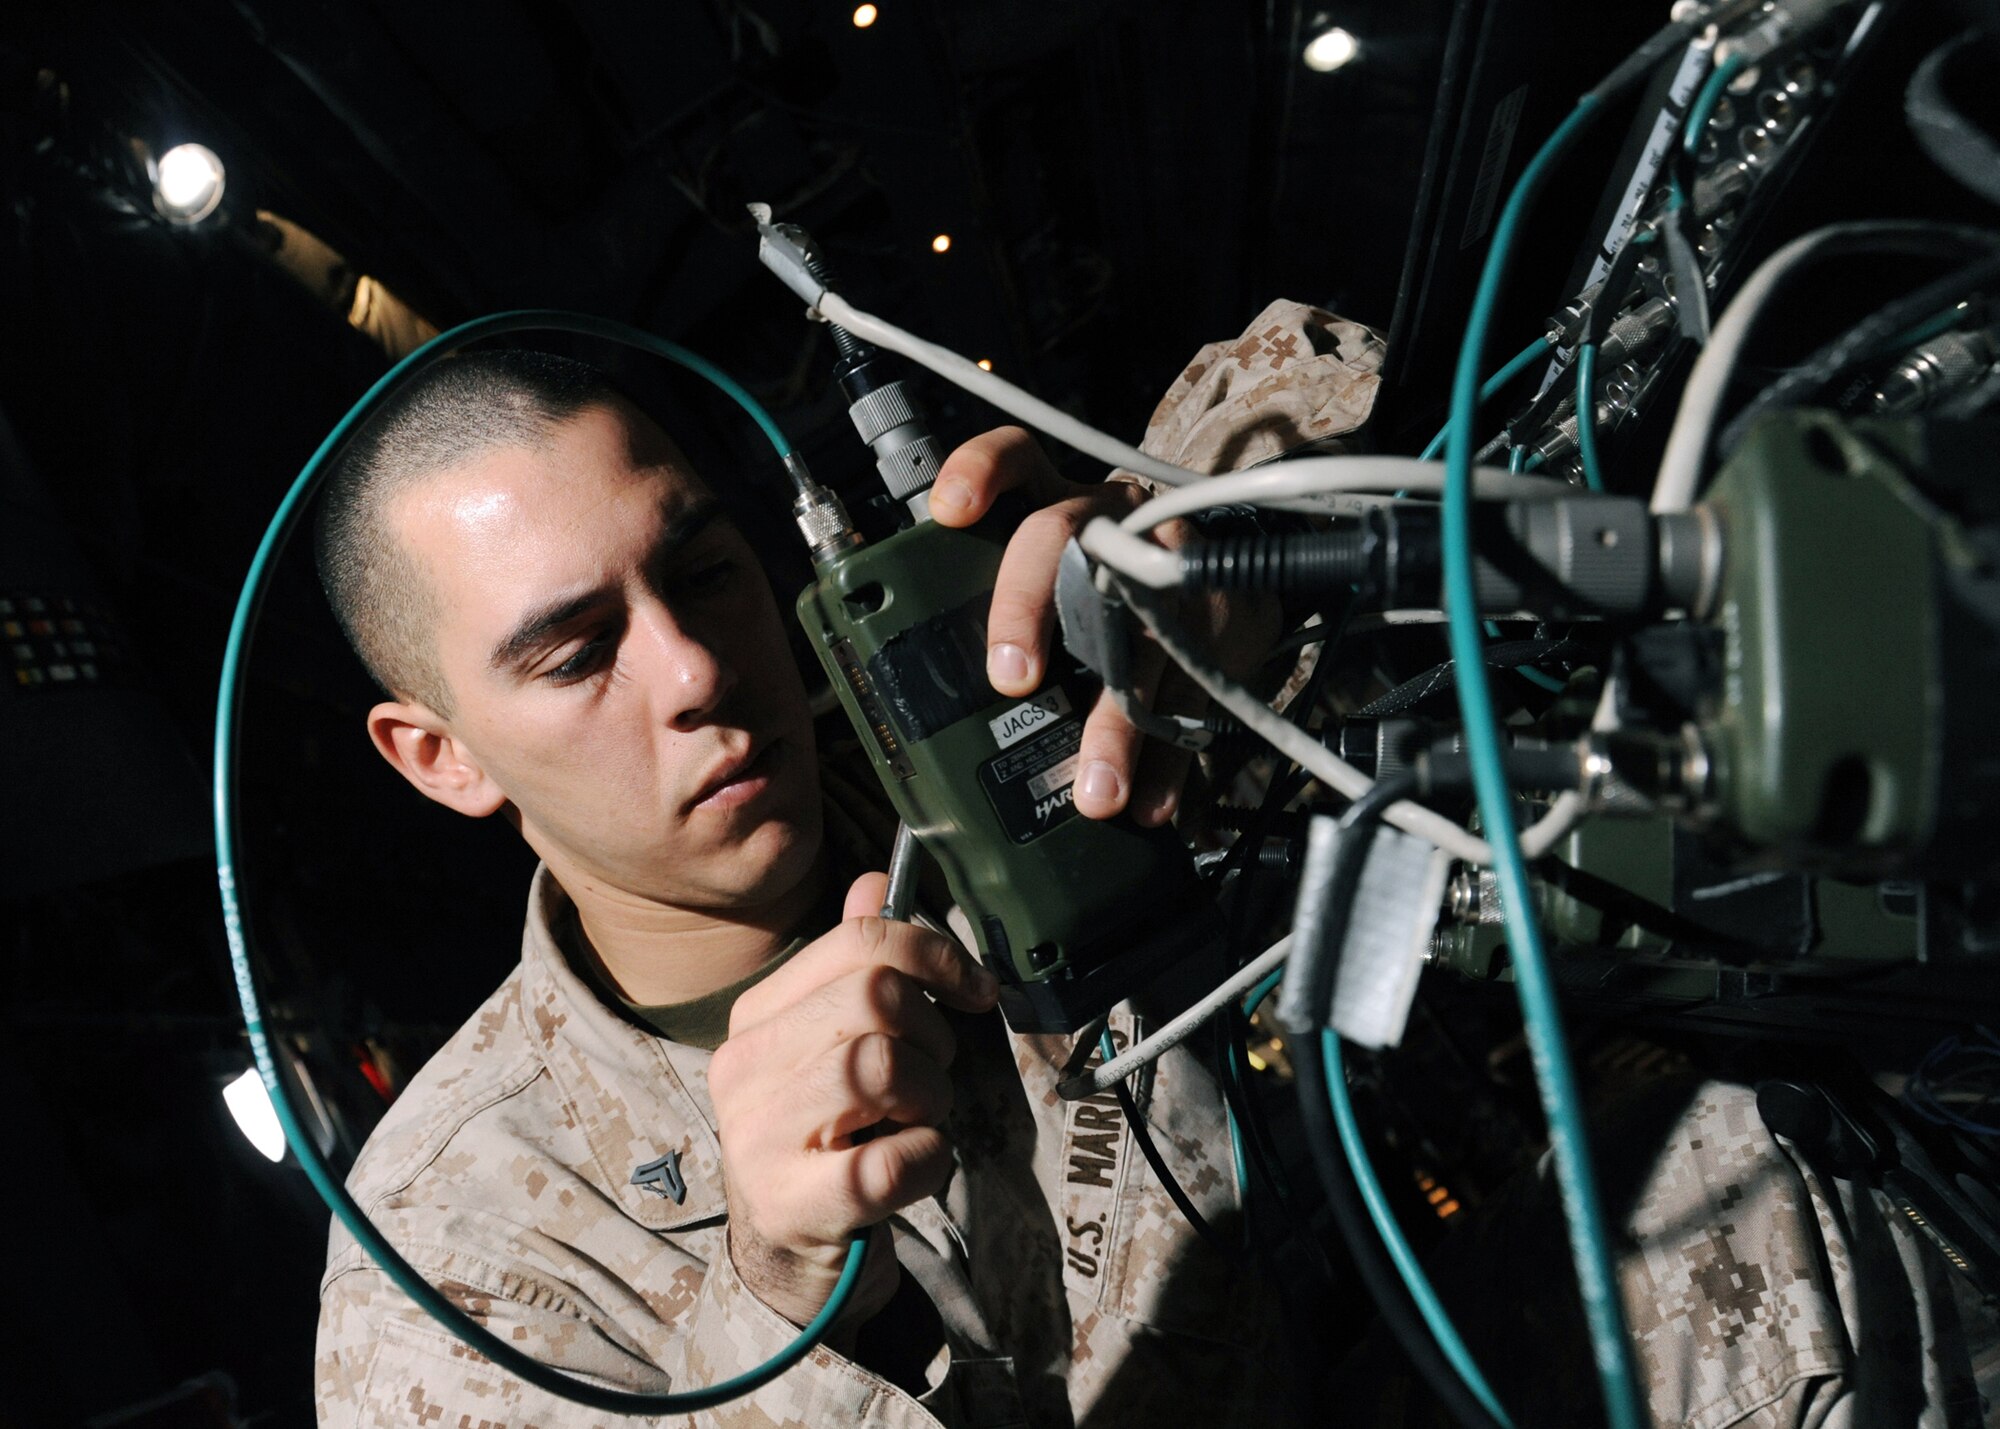 Marine Cpl. Joseph Colby checks the presets and frequencies of radios on a joint airborne battle staff detachment C-130 prior to a mission Nov. 24, 2009 at Joint Base Balad, Iraq. The JABS is a joint operation focused on providing airborne communications support to ground forces. Corporal Colby is an 777th Expeditionary Airlift Squadron air control electronics operator. (U.S. Air Force photo/Senior Airman Christopher Hubenthal)